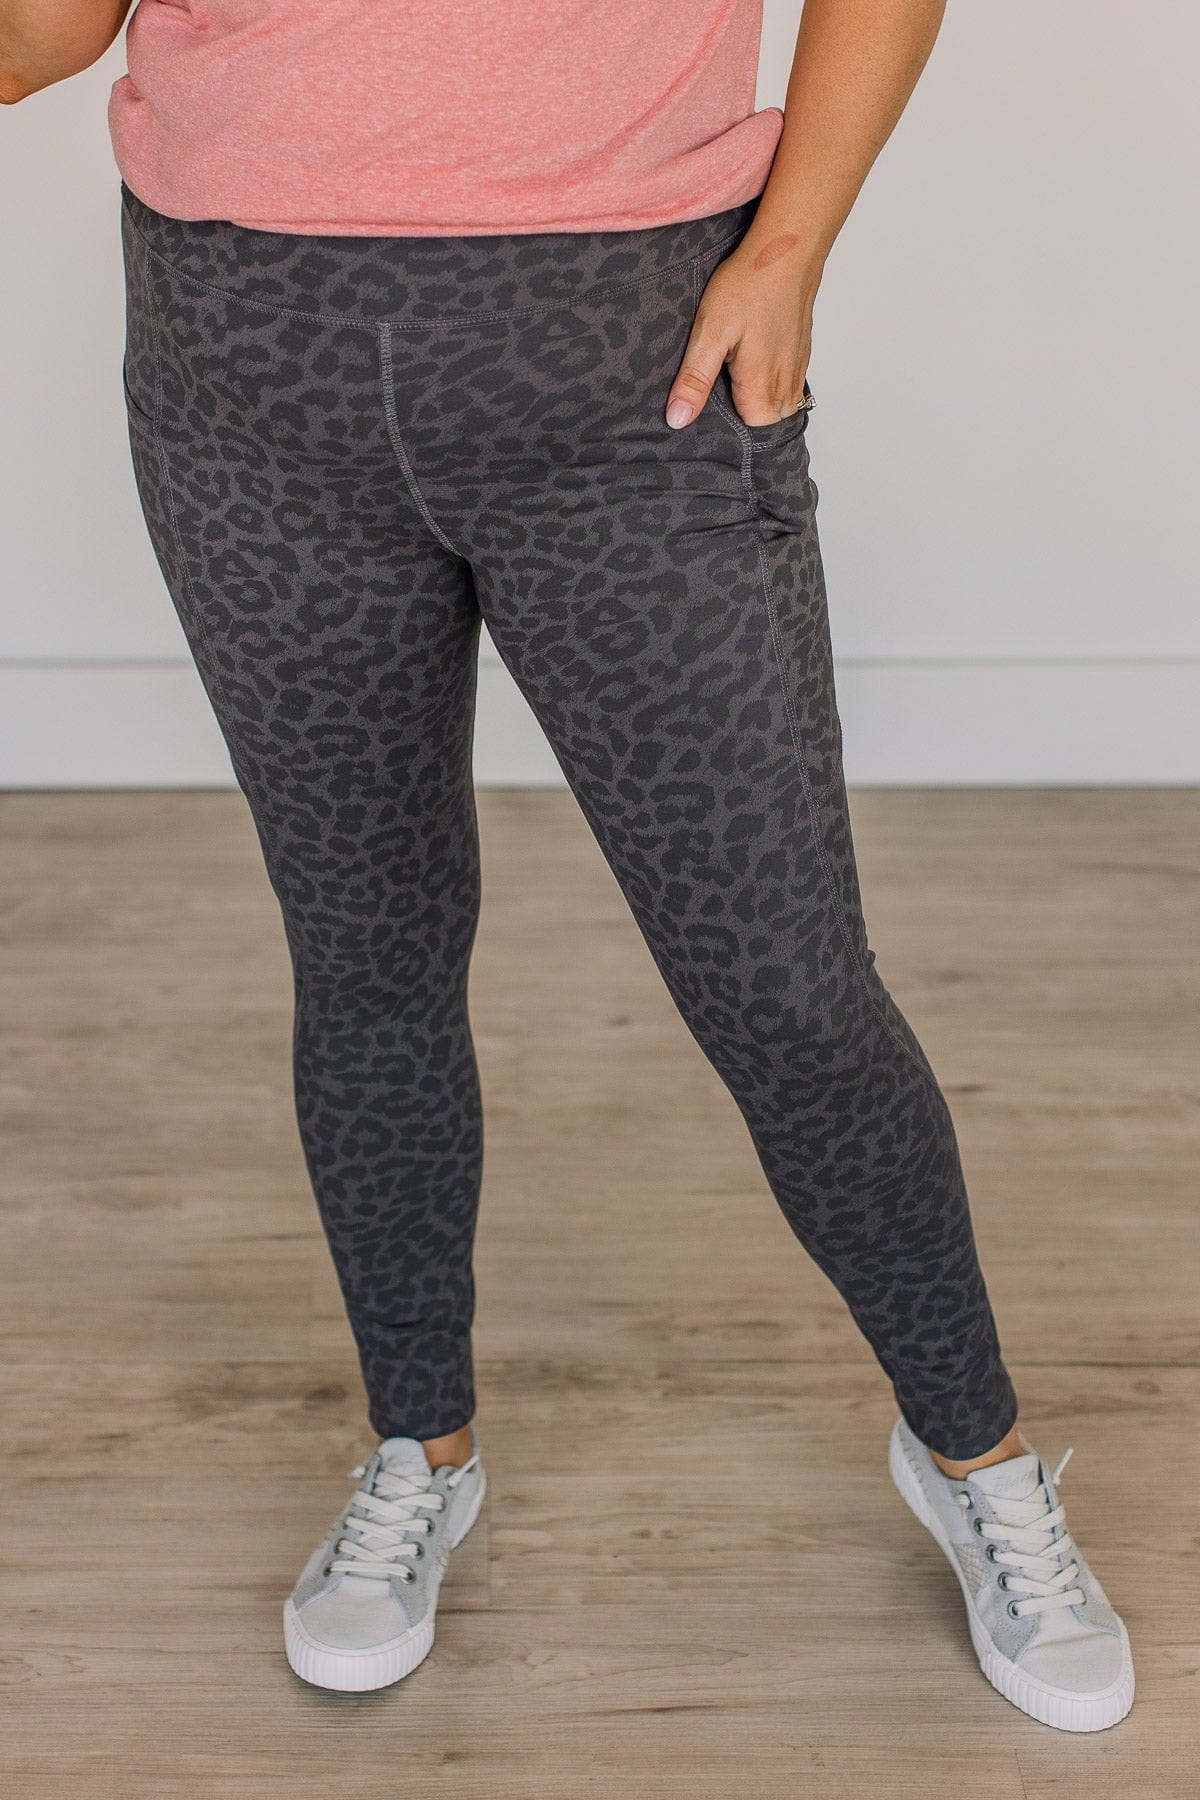 On A Mission Athleisure Leggings- Charcoal Leopard Print